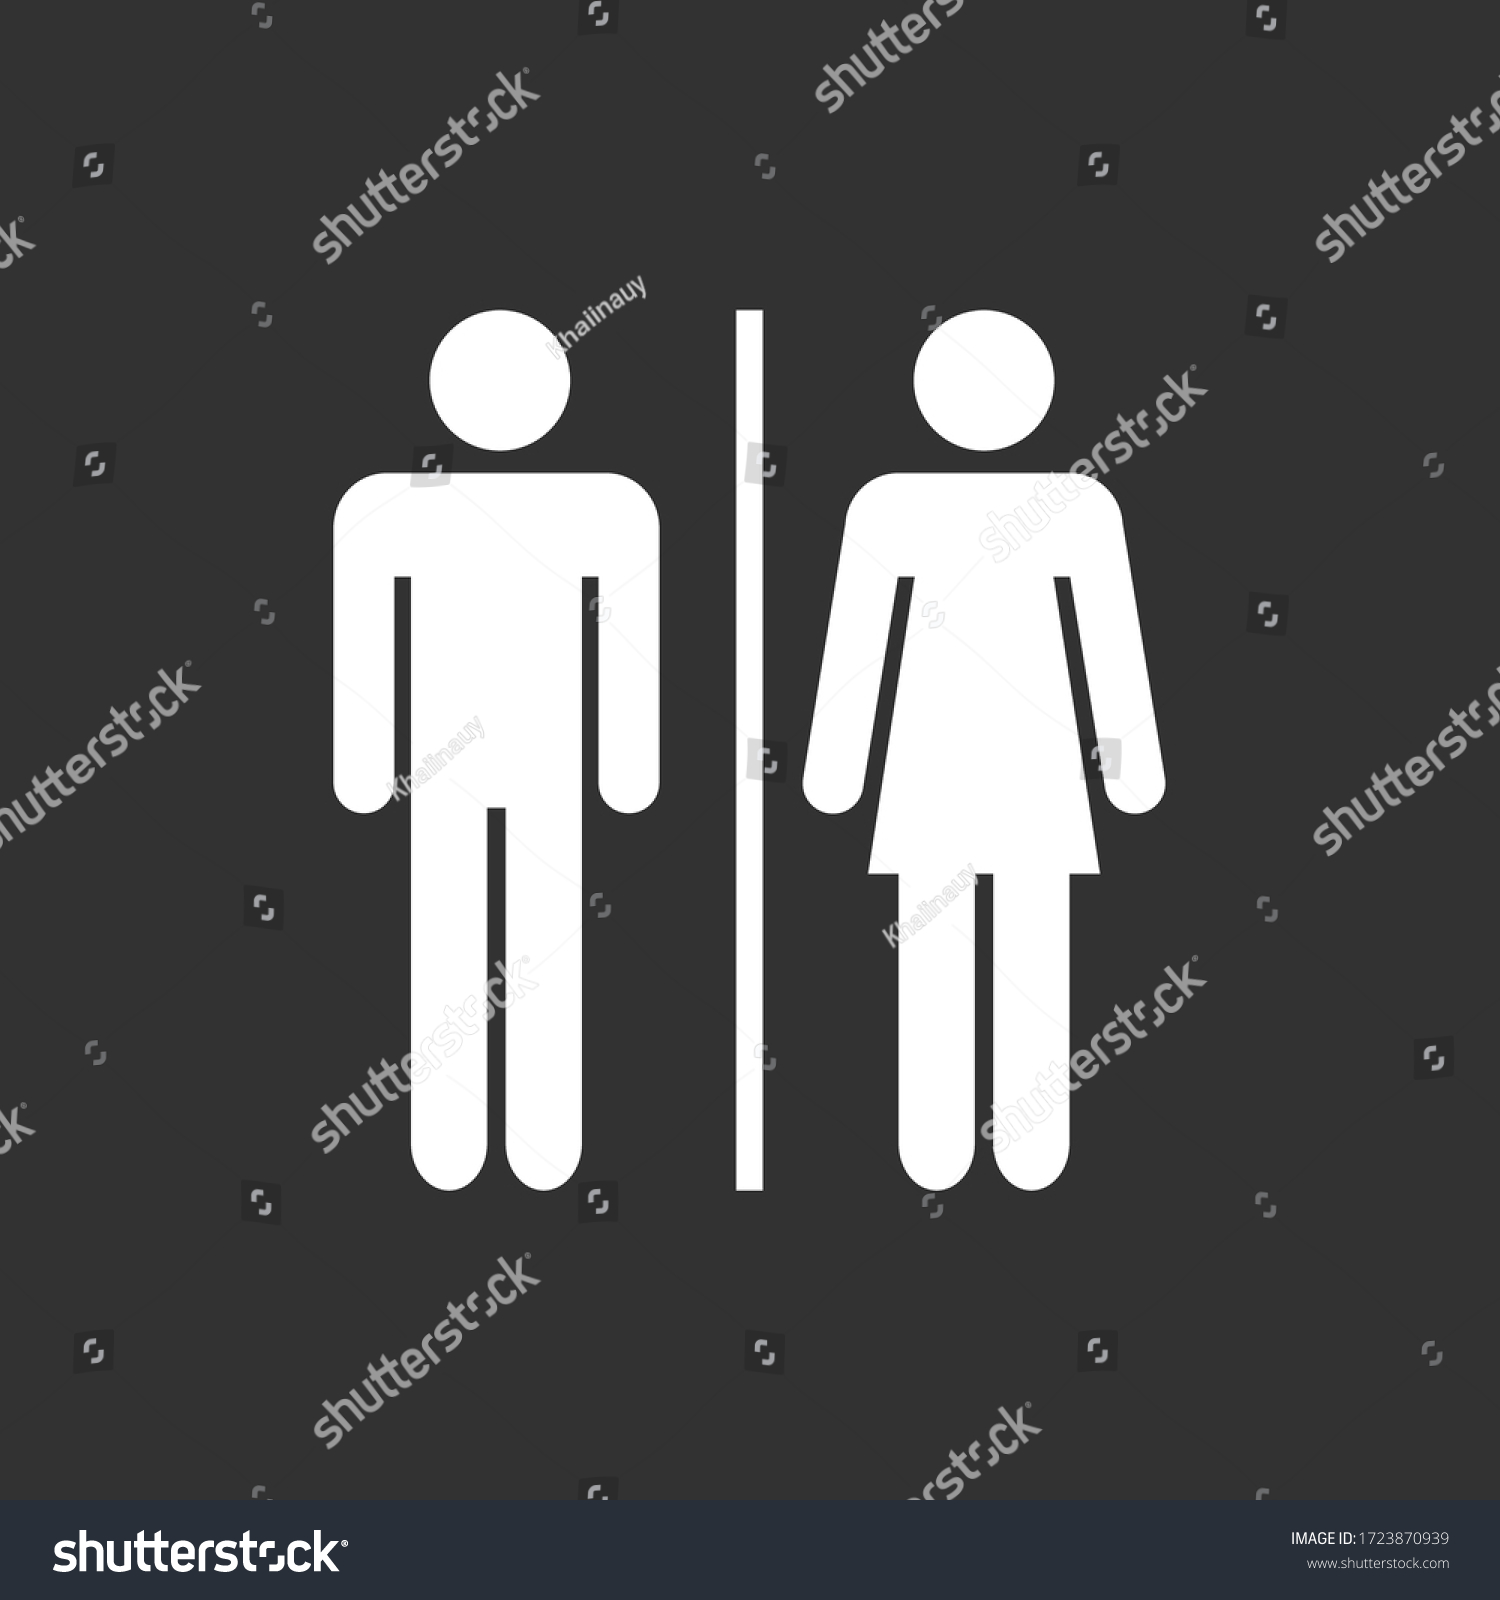 Toilets Vector Icon Male Female Toilet Stock Vector Royalty Free Shutterstock